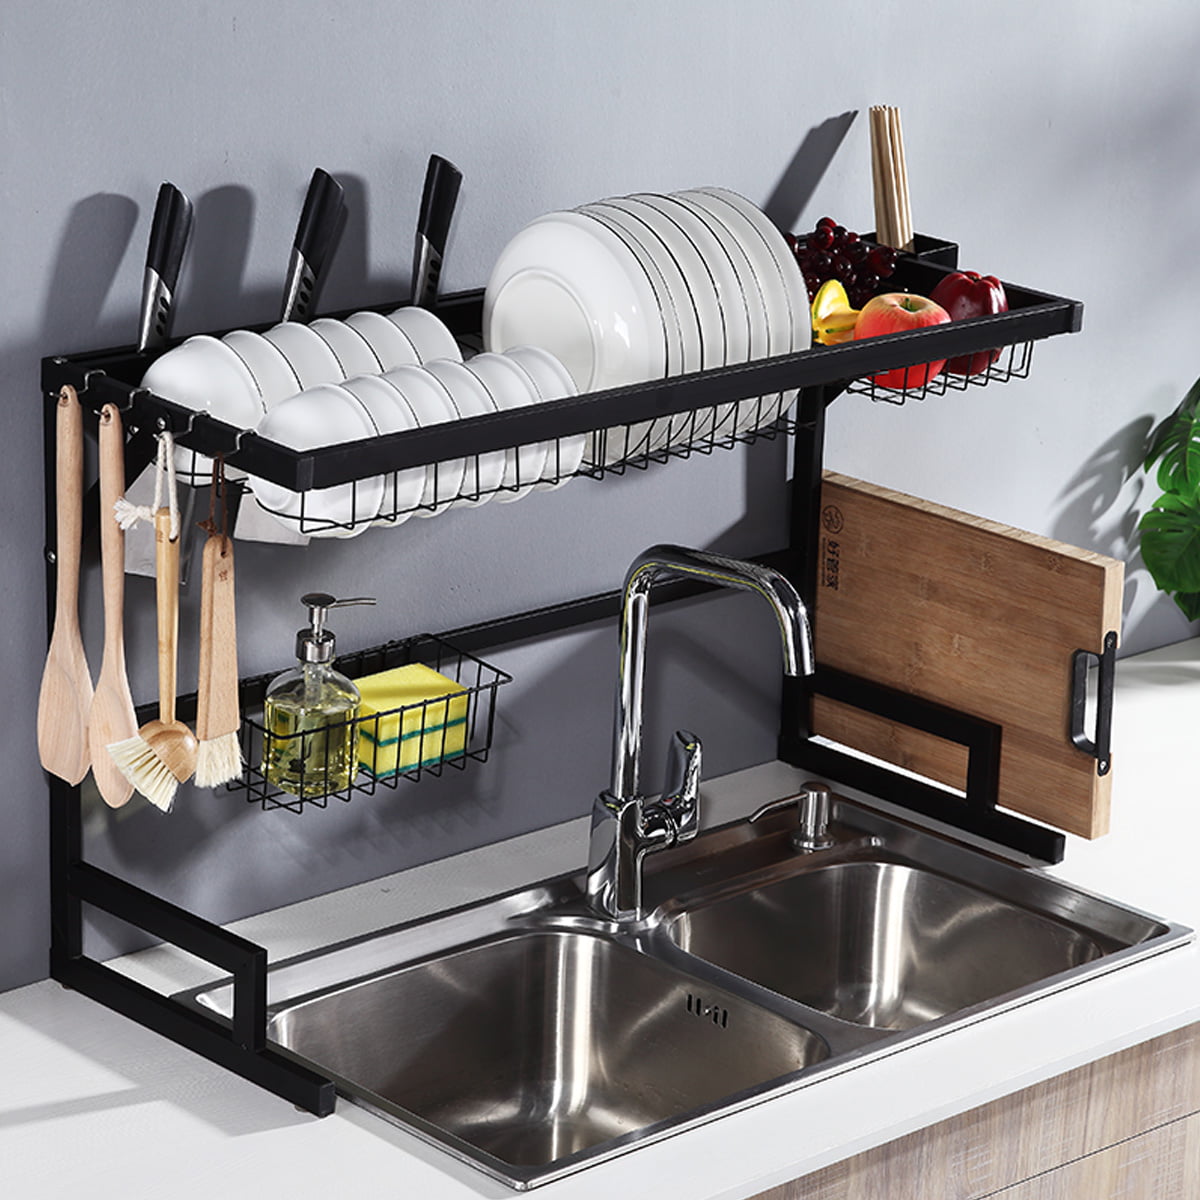 2Tier Dish Drying Rack Over Sink Holder Stand, 304 Stainless Steel Storage Rack, Kitchen Sink